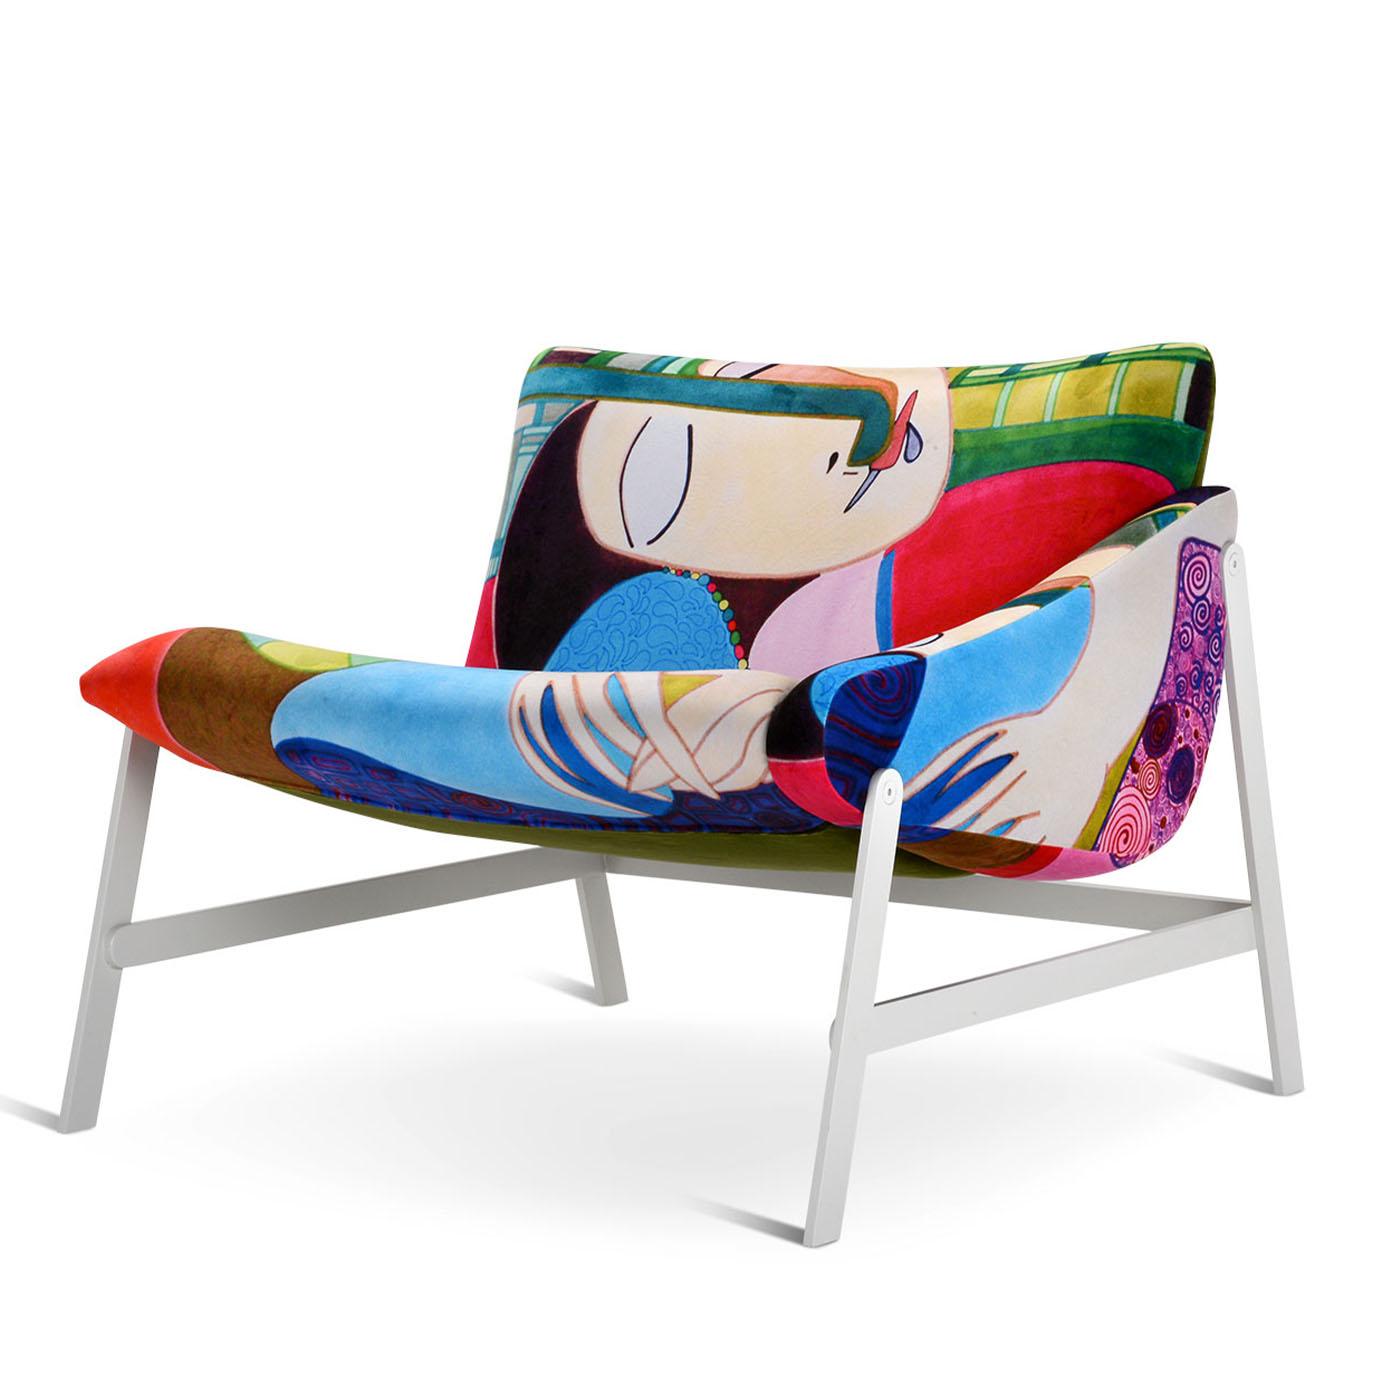 A colorful Picasso-inspired fabric exclusively designed by Le Clochart for Adrenalina lends this armchair its exceptional artful personality. The human figure emerging from the cover transforms into friendly company for those sitting down, welcoming